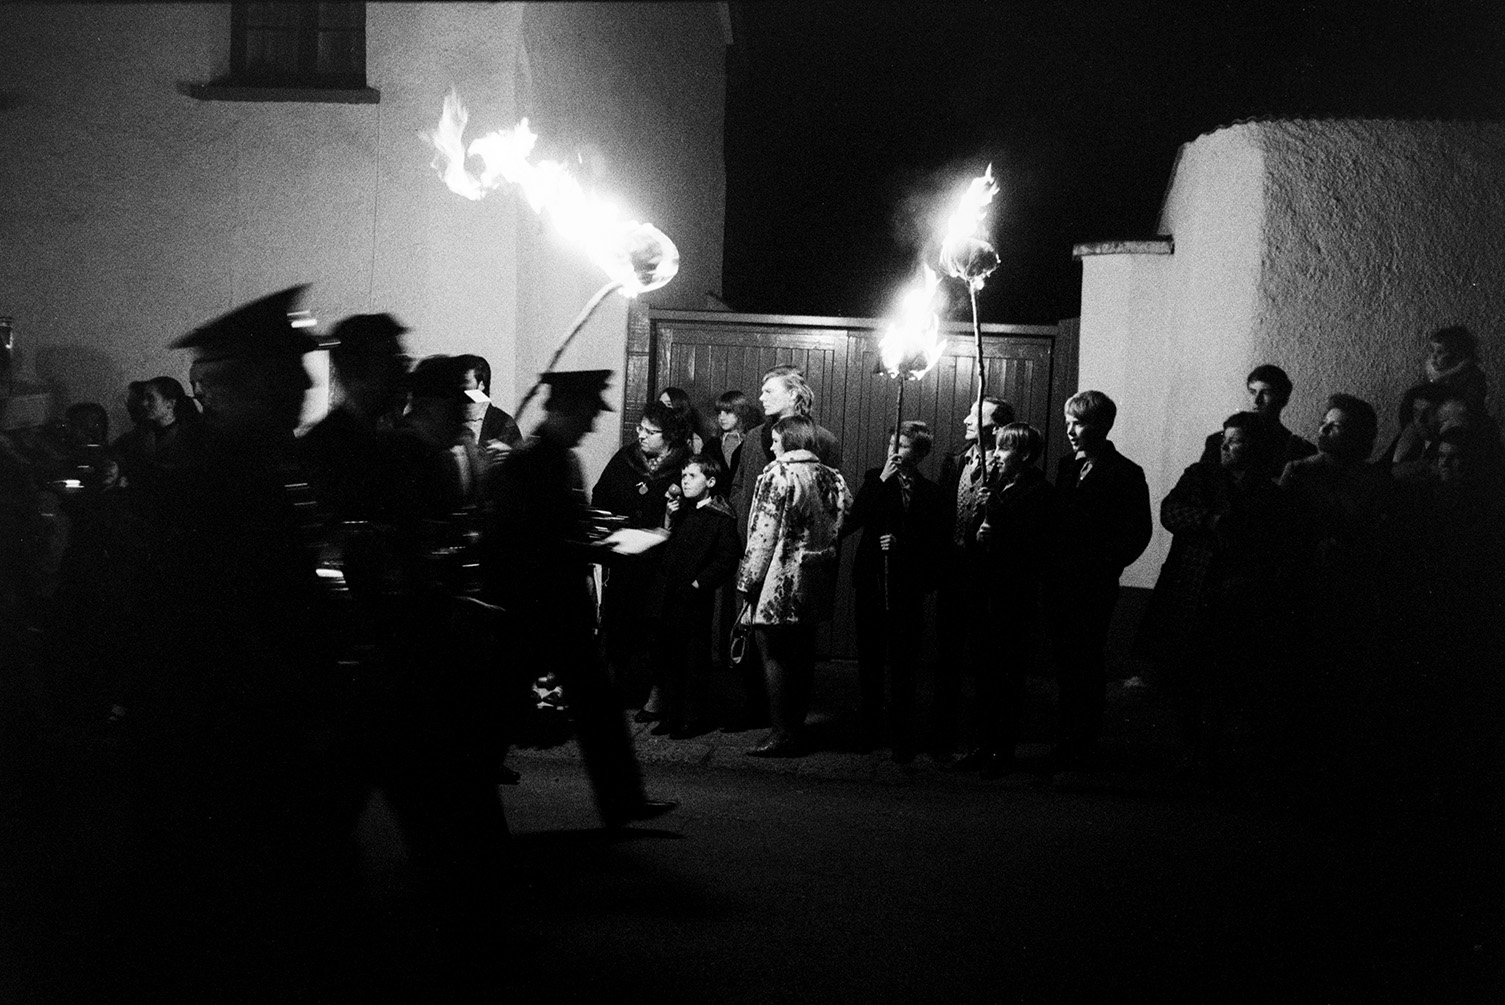 Spectators holding burning torches watching band members parading in Hatherleigh Carnival at night.